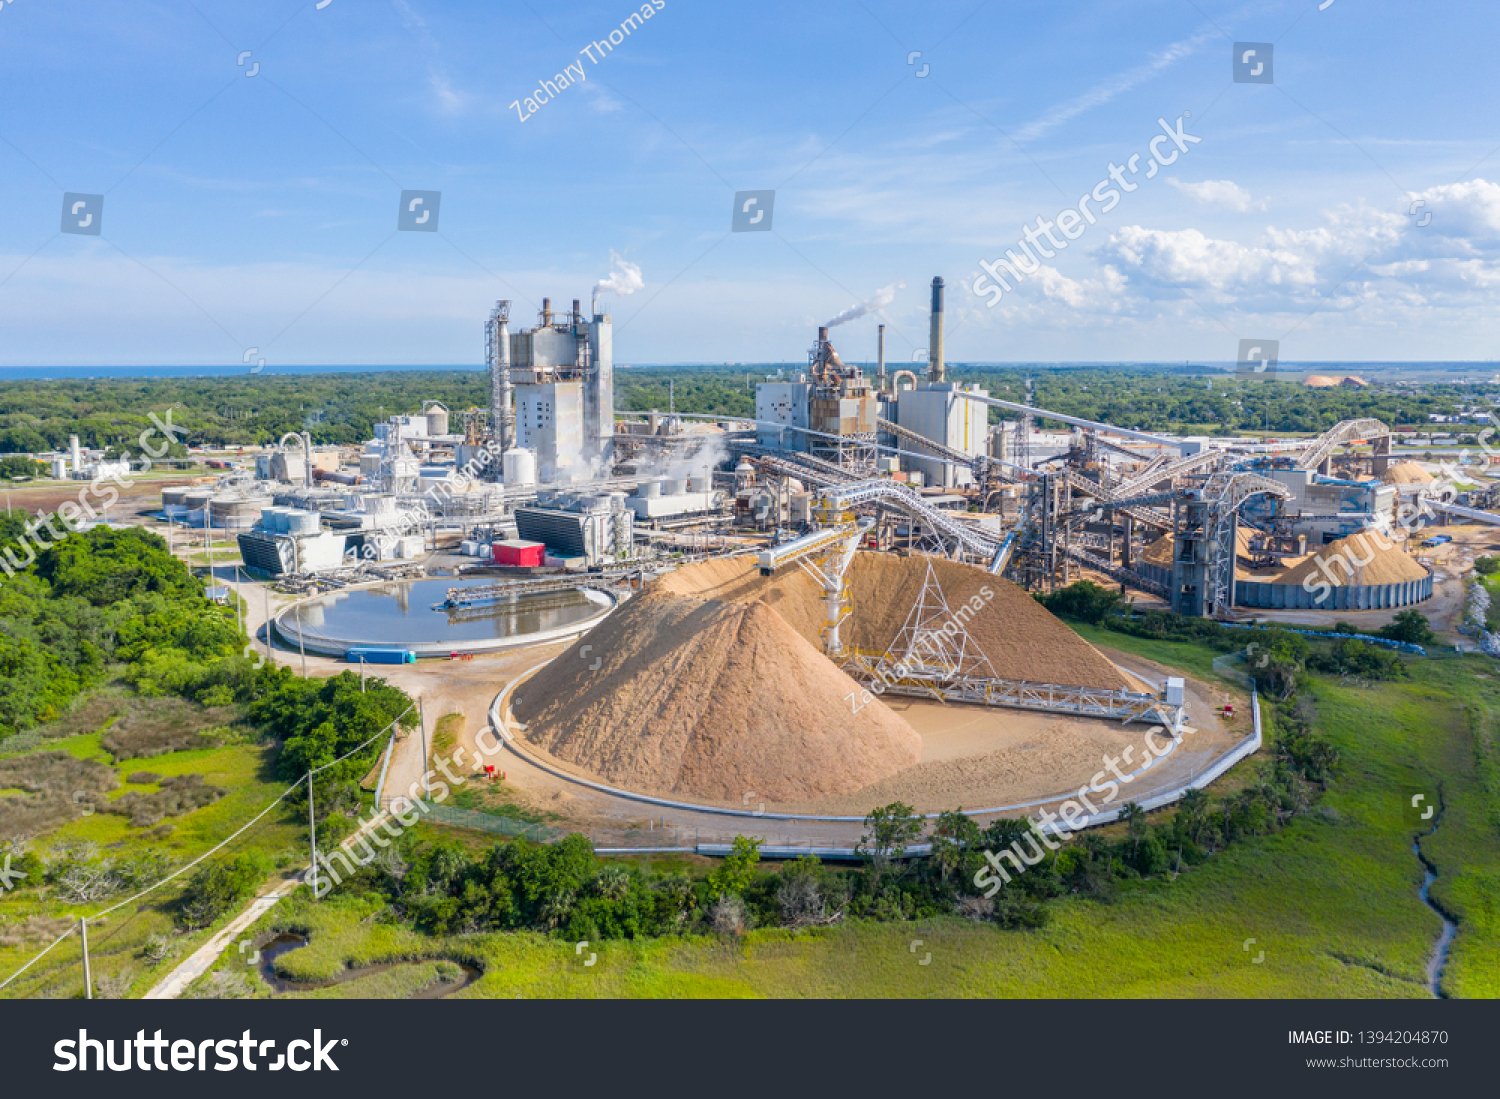 Aerial view of a paper mill #1394204870